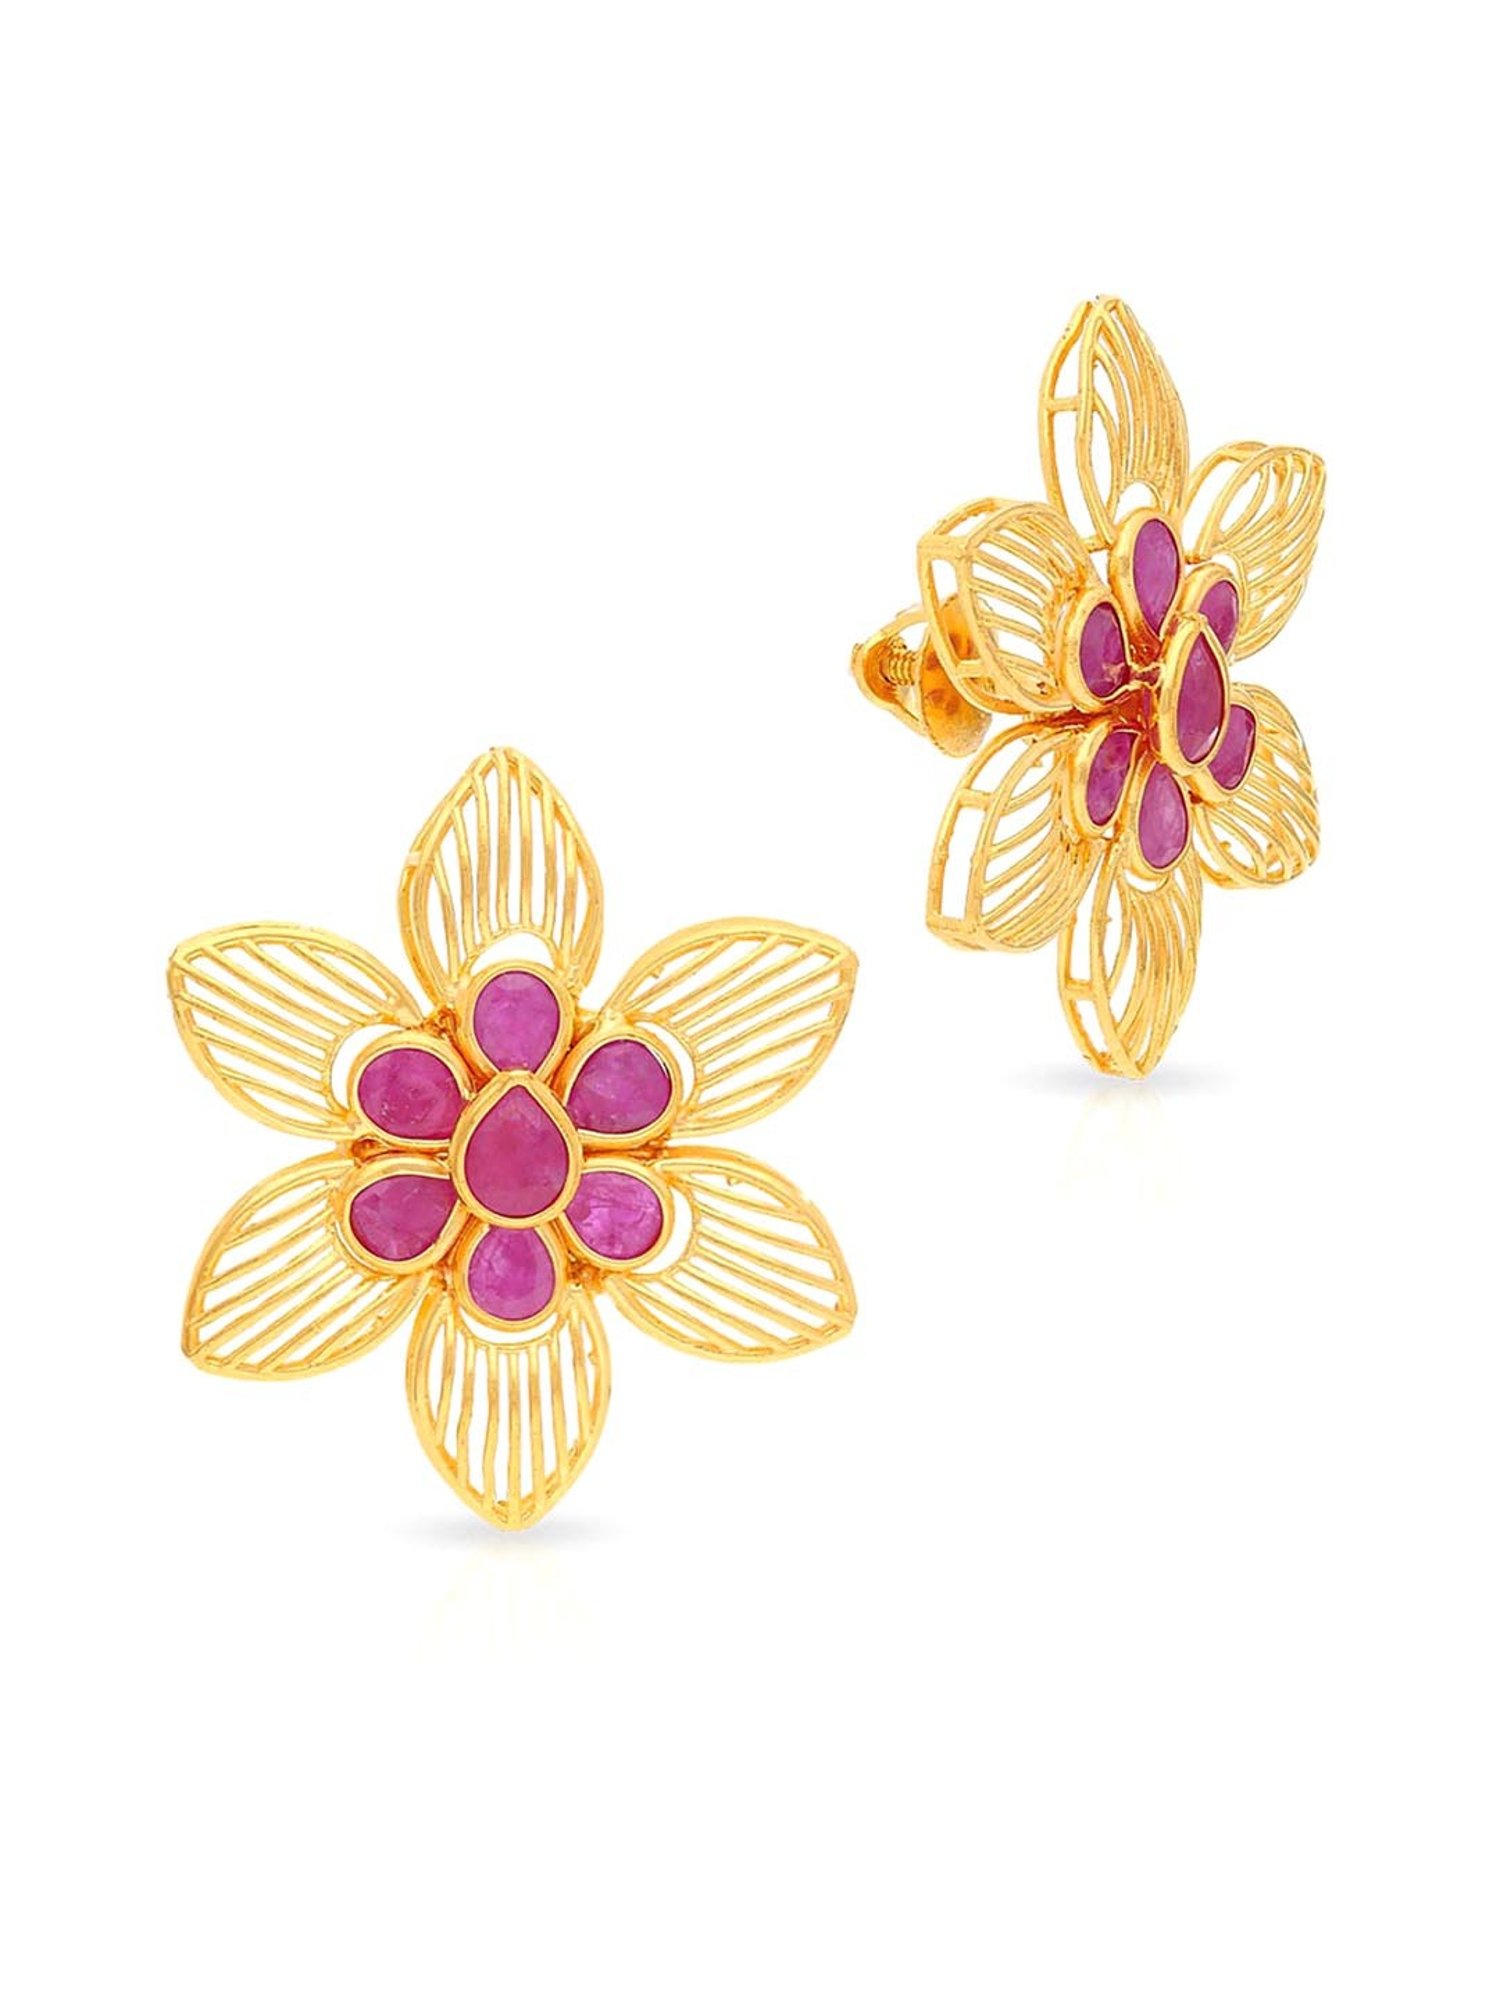 Discover more than 108 malabar gold earrings collection